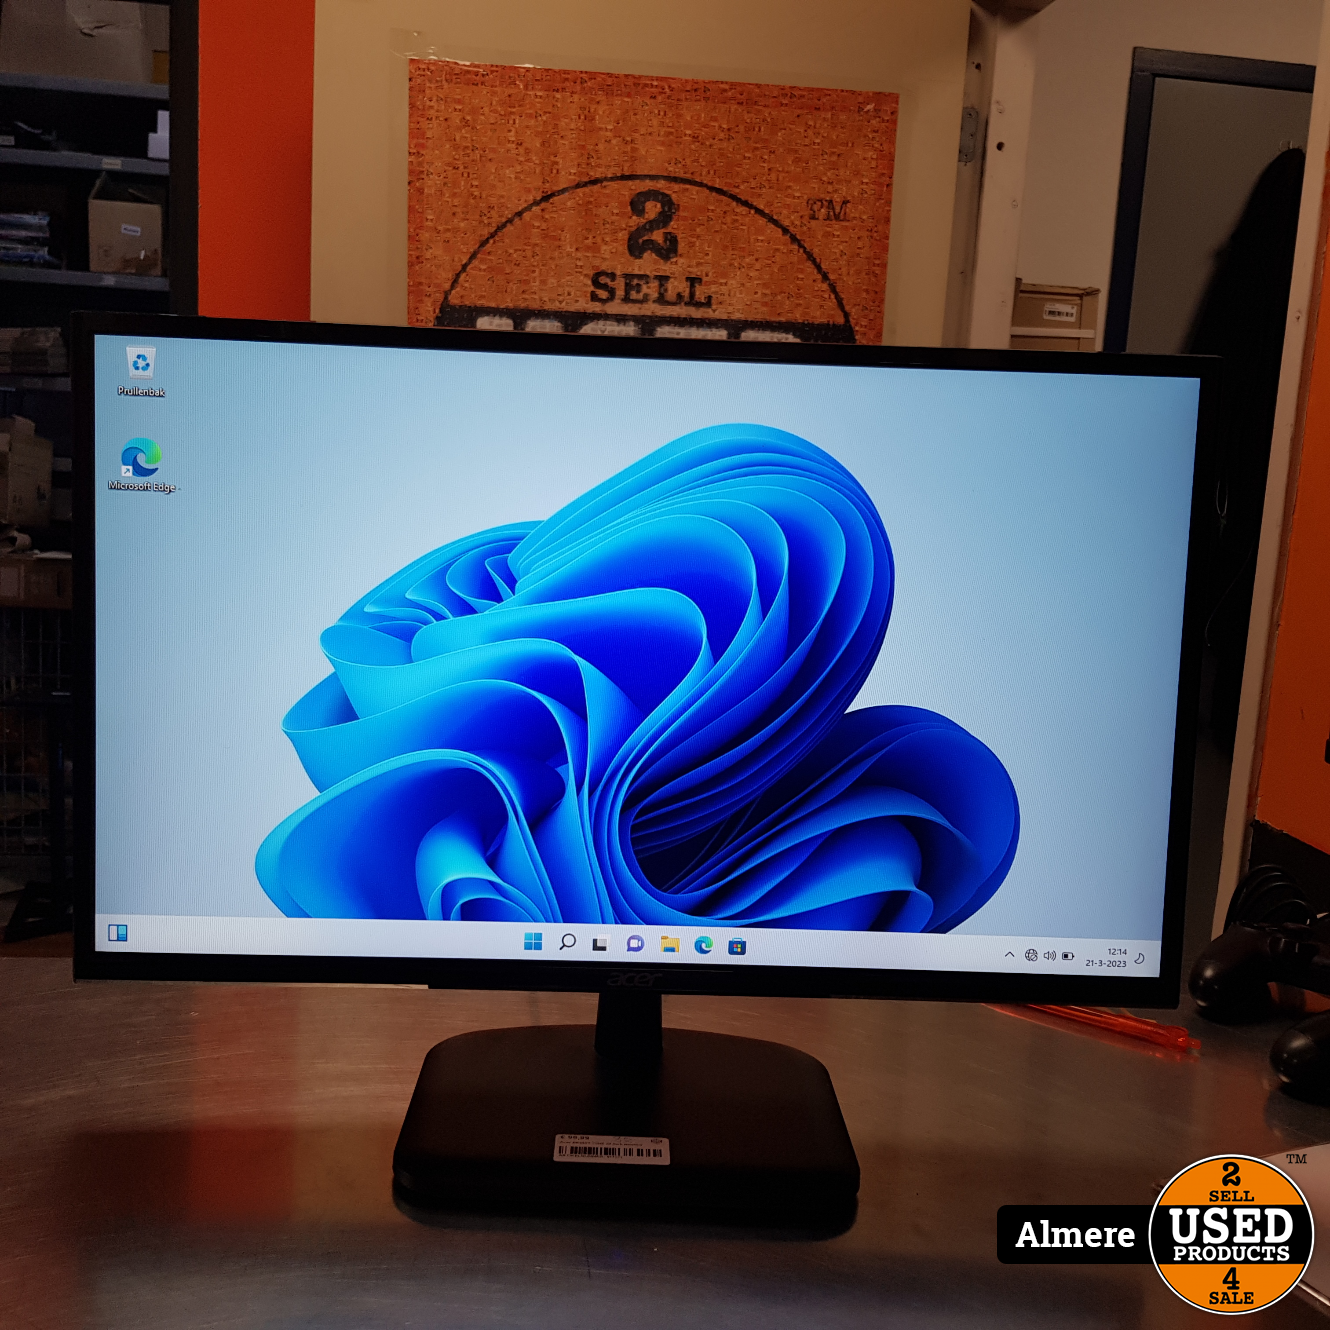 Automatisering complicaties Kinderen Acer EK240Y 75HZ 24 Inch monitor - Used Products Almere